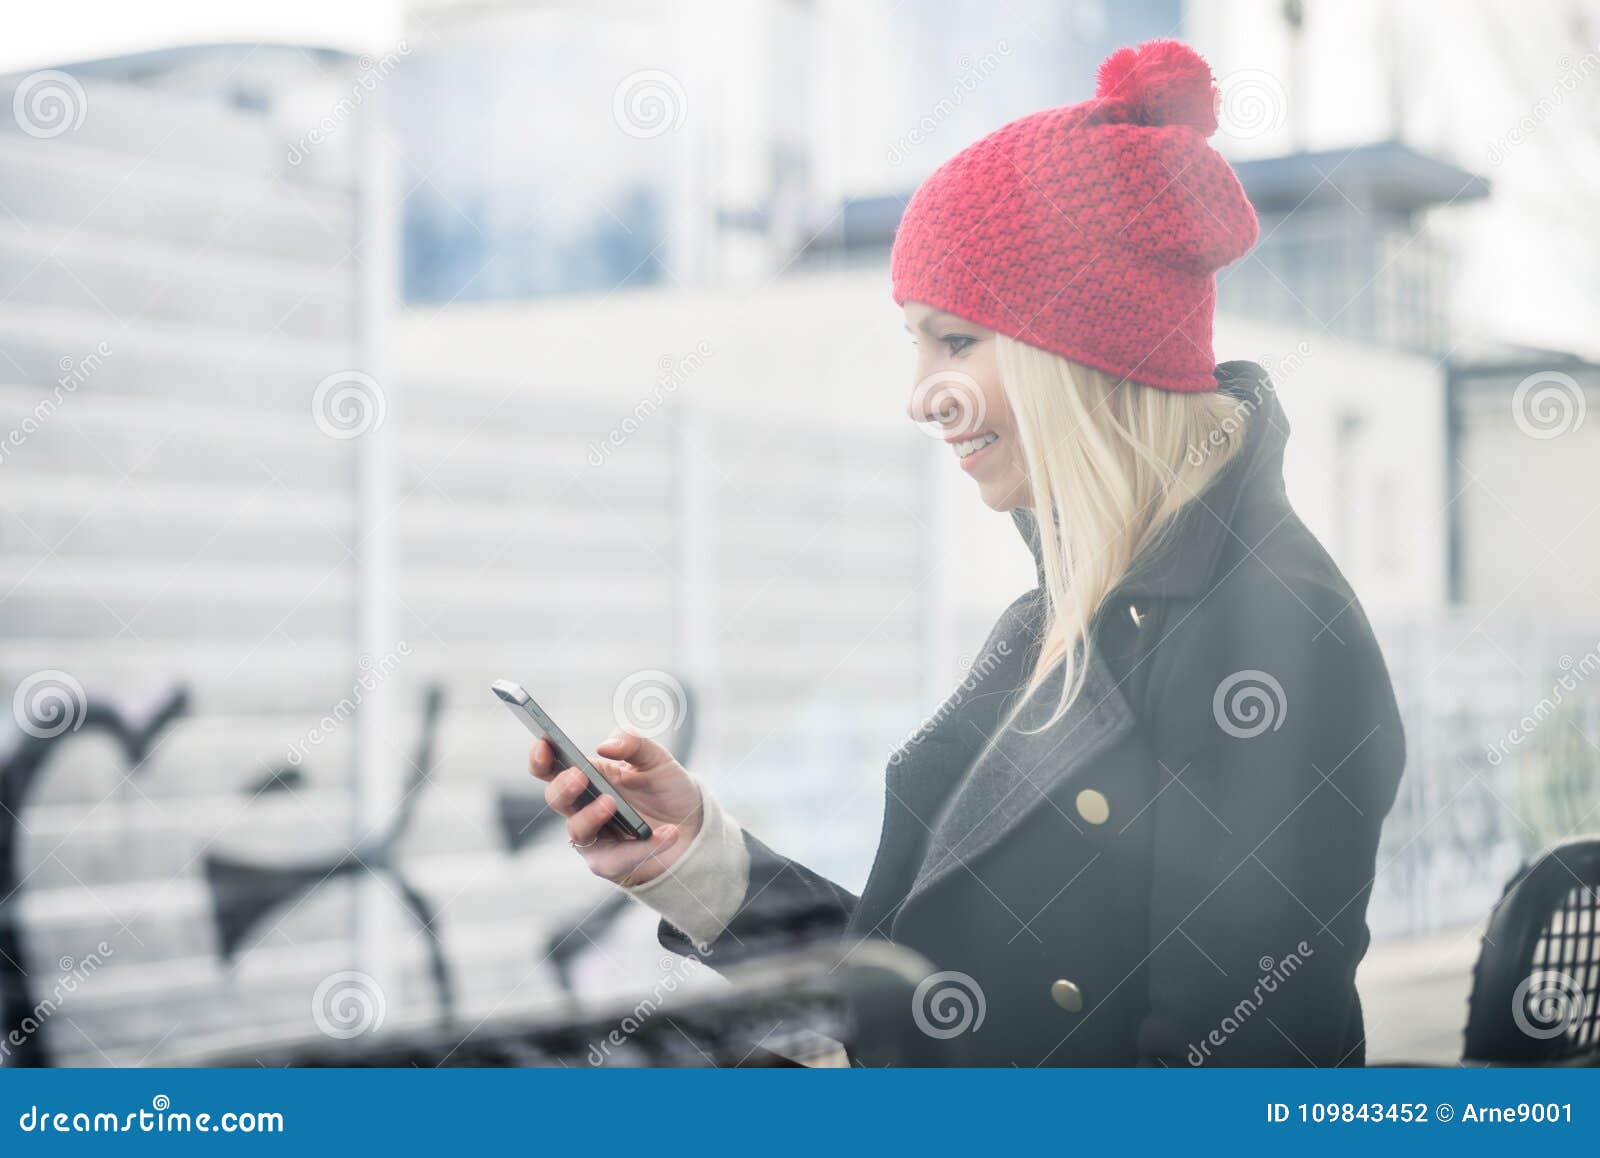 Woman Using Phone while Waiting for a Suburban Train Stock Photo ...